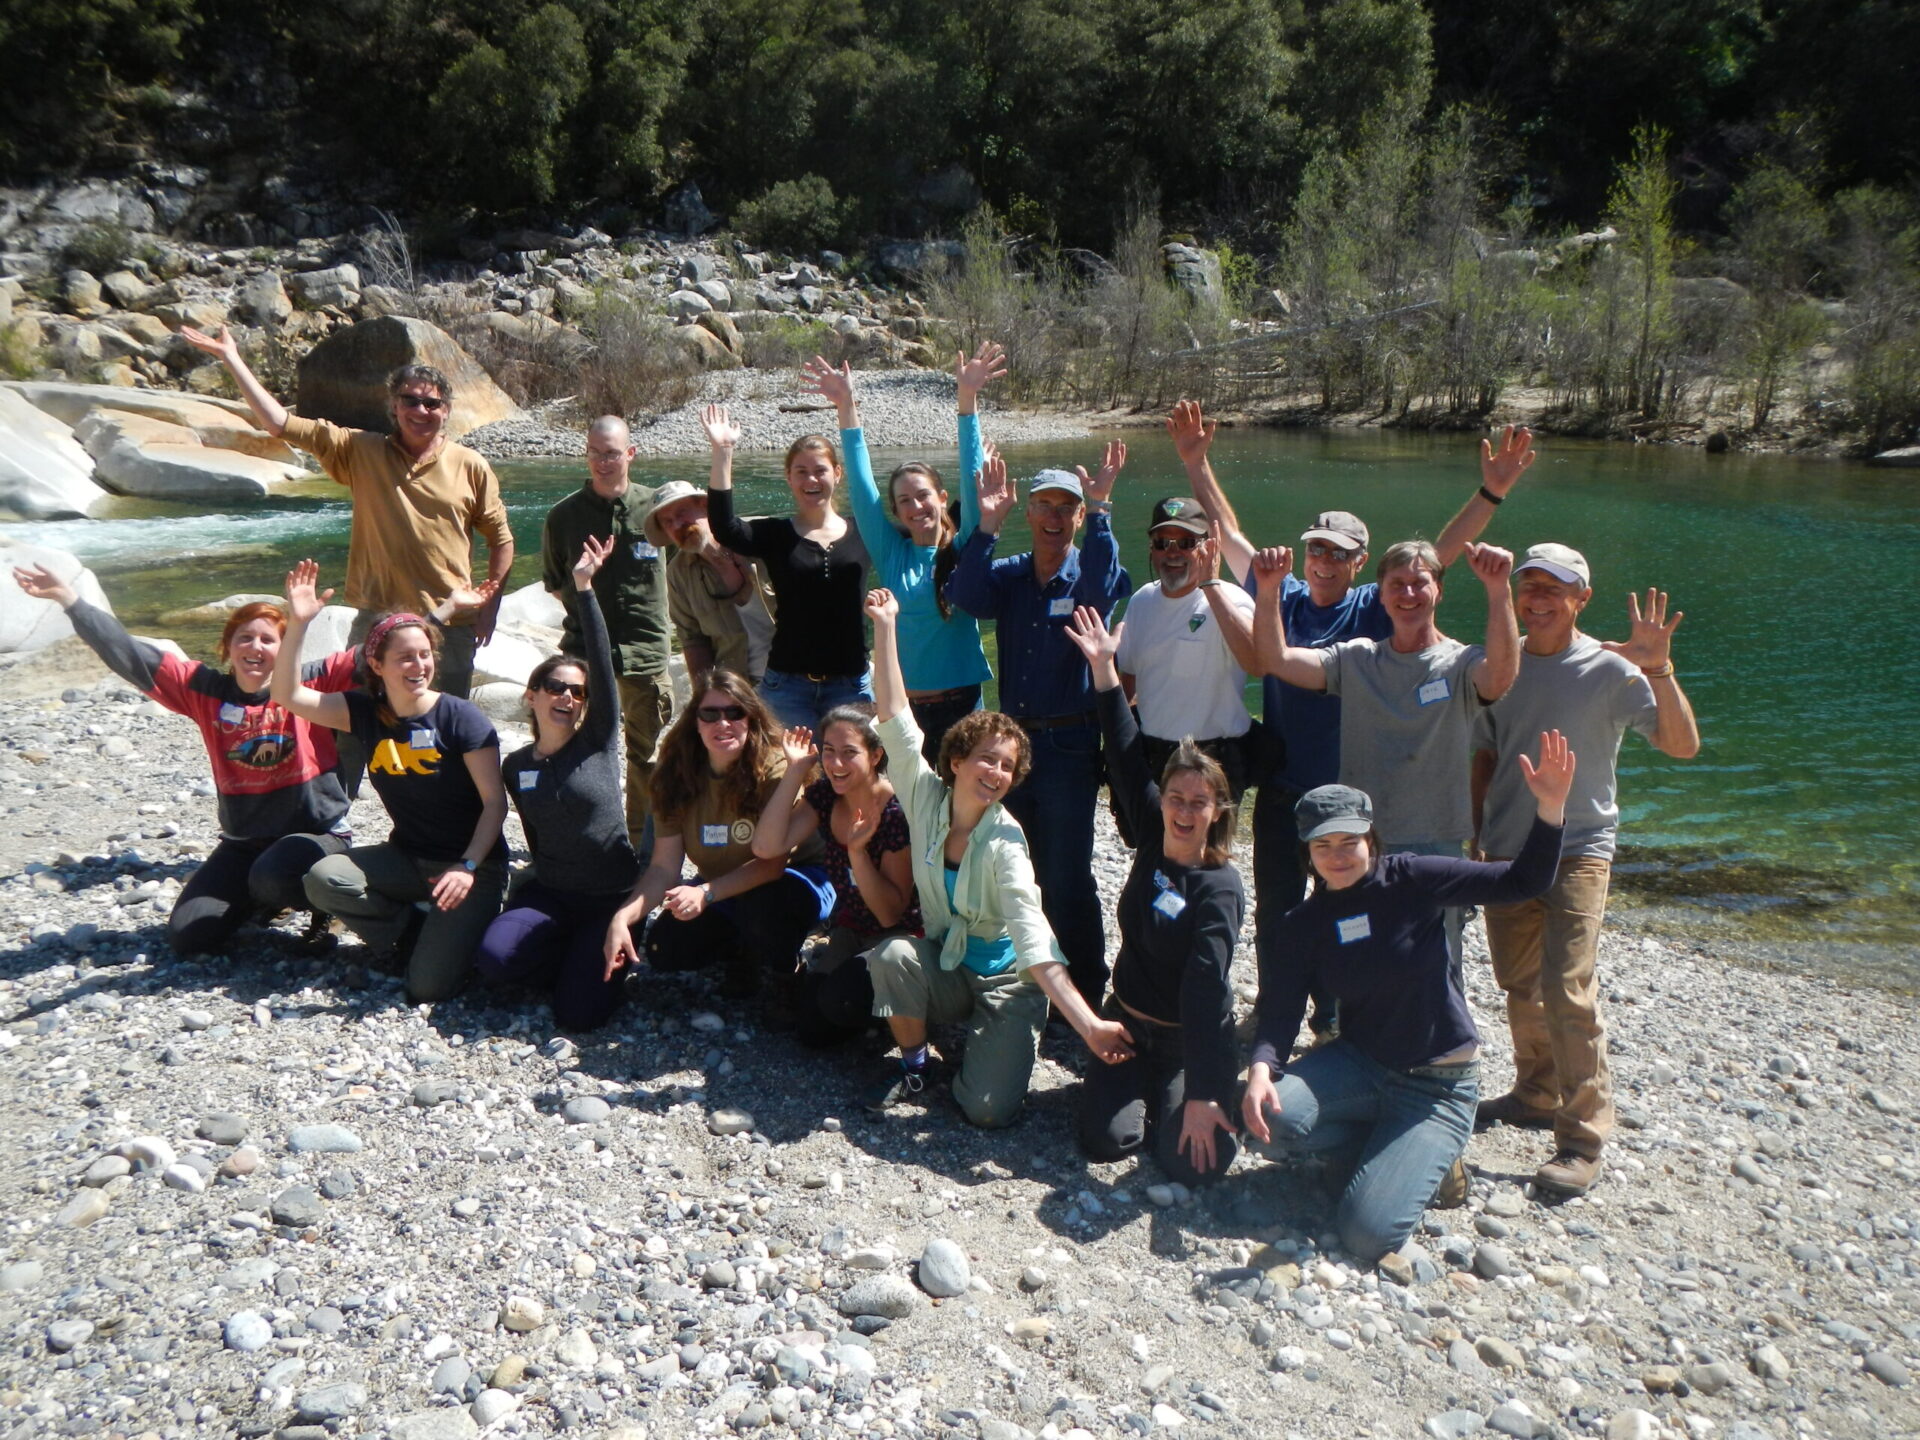 20 SYRCL restoration volunteers celebrate by the beautiful South Yuba River at Hoyt's Crossing